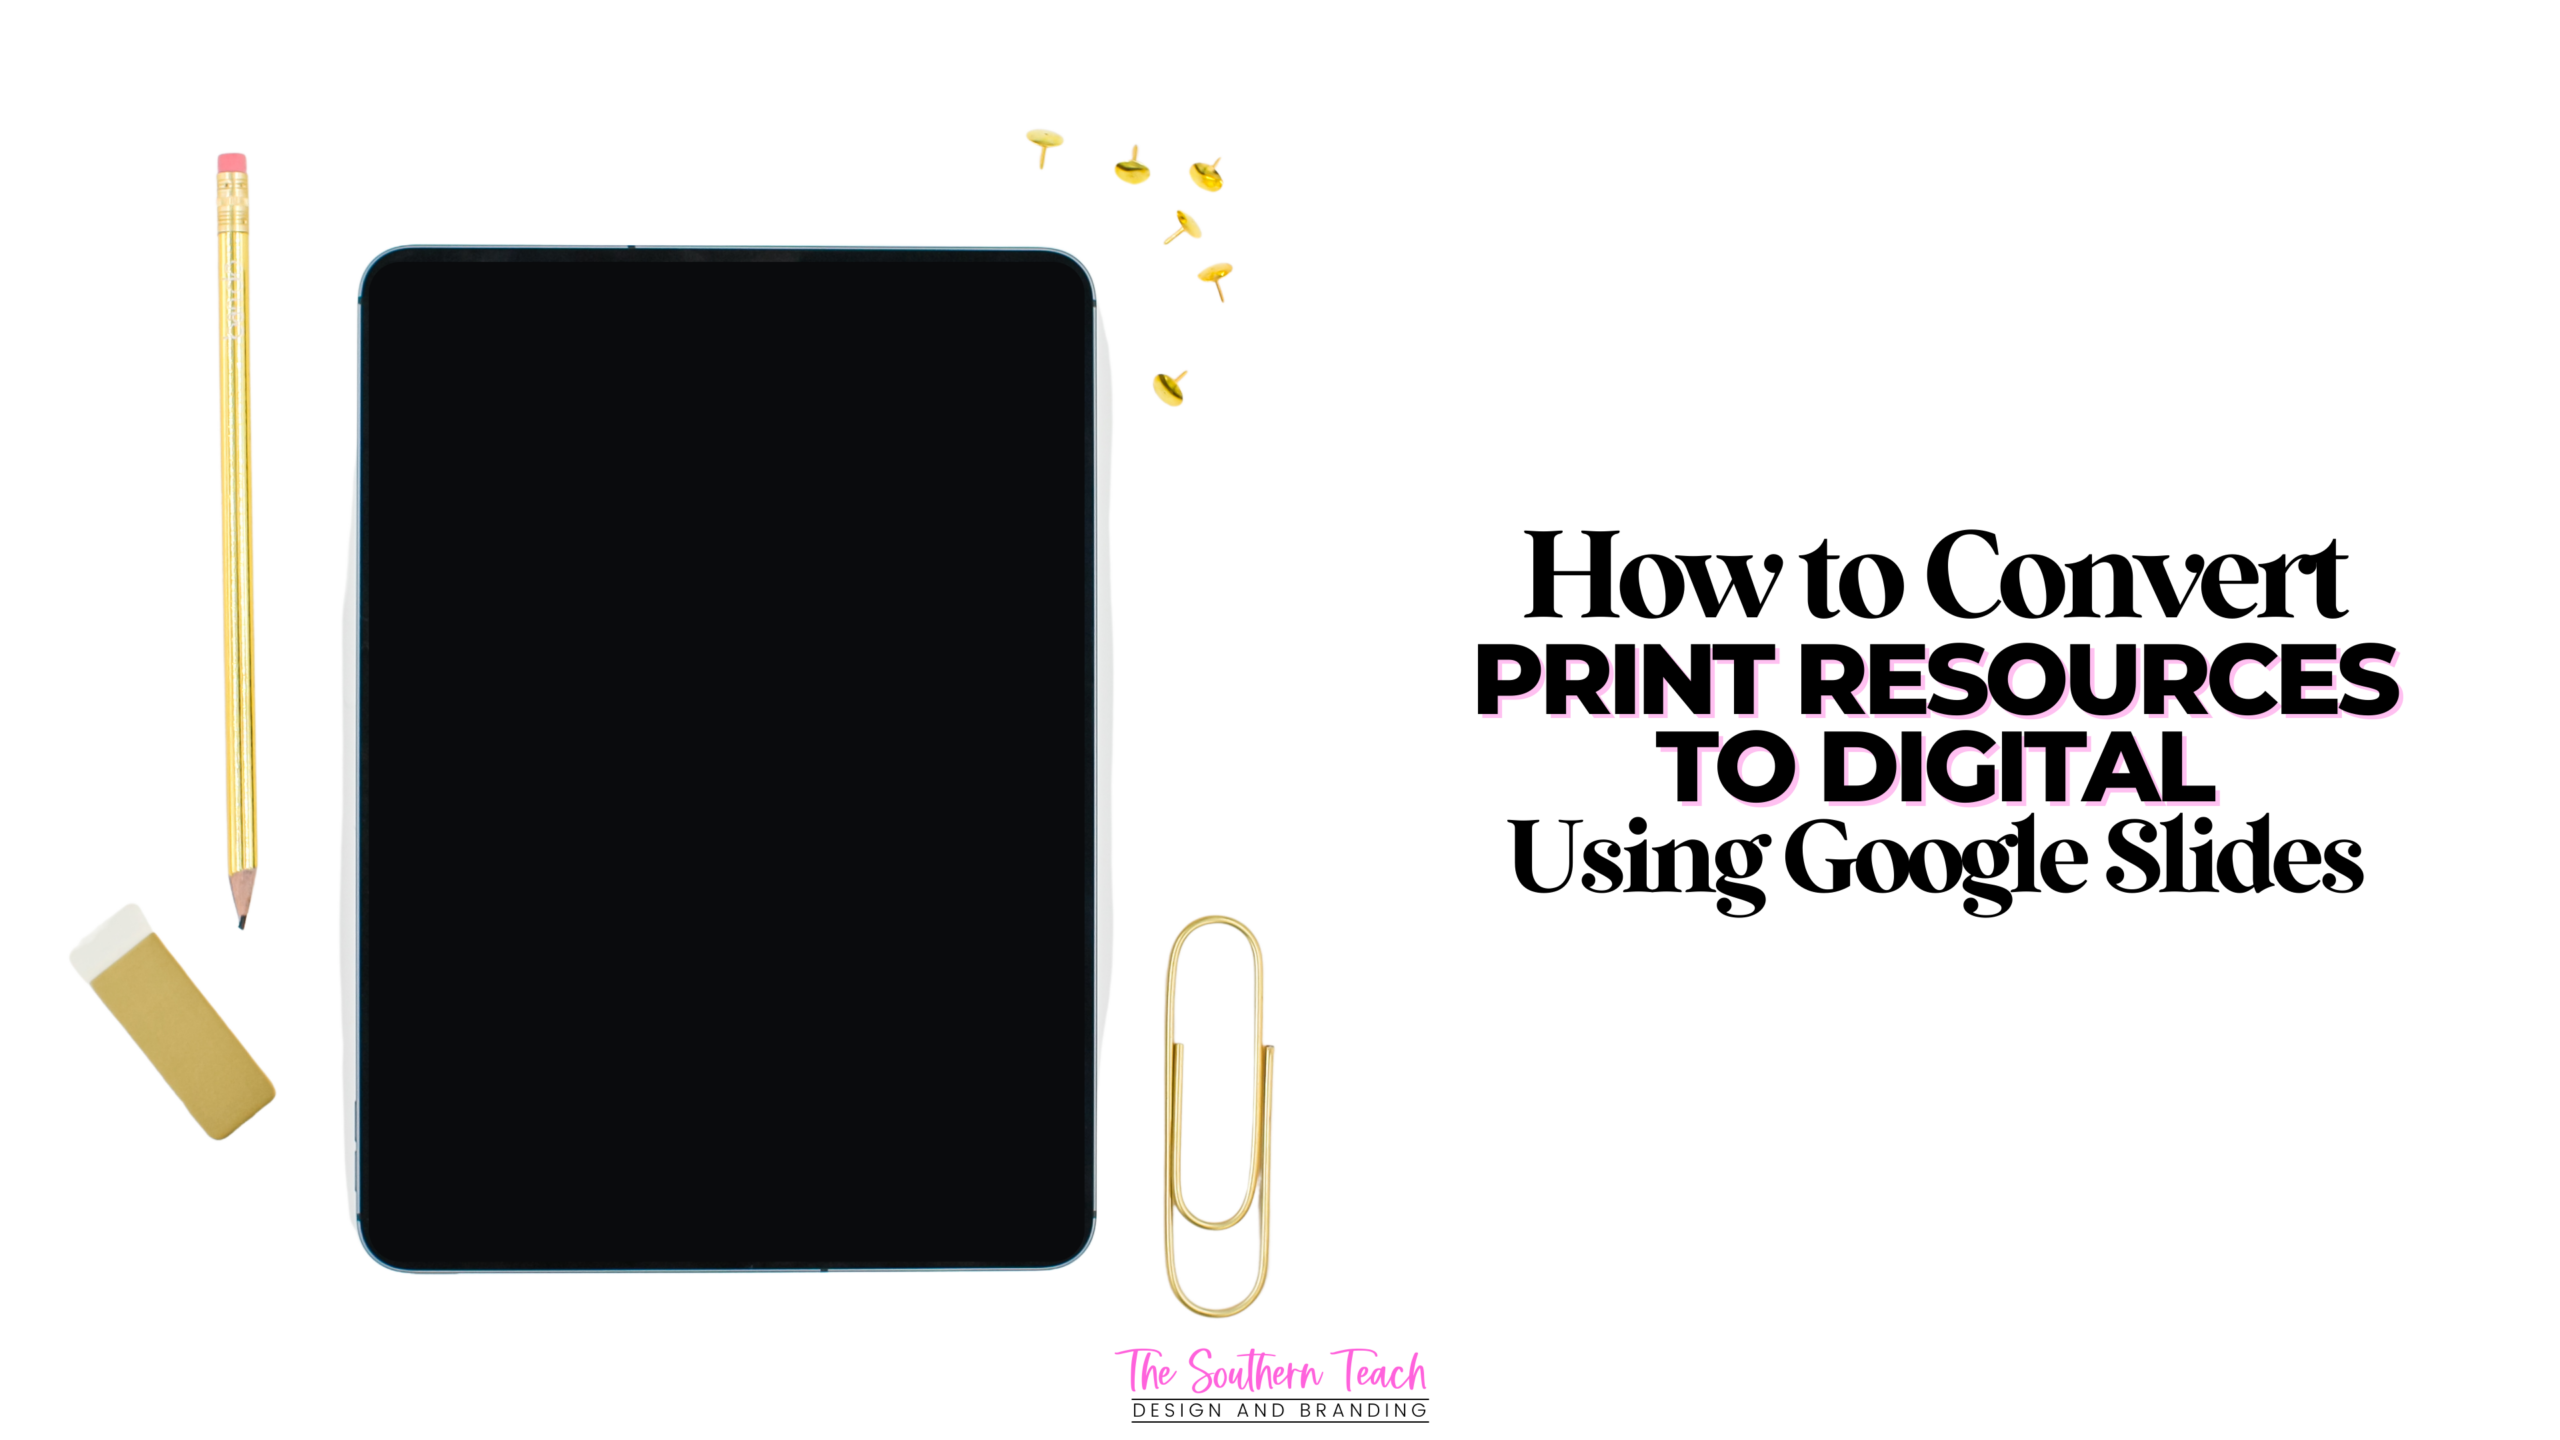 How to Convert Print Resources to Digital using Google Slides